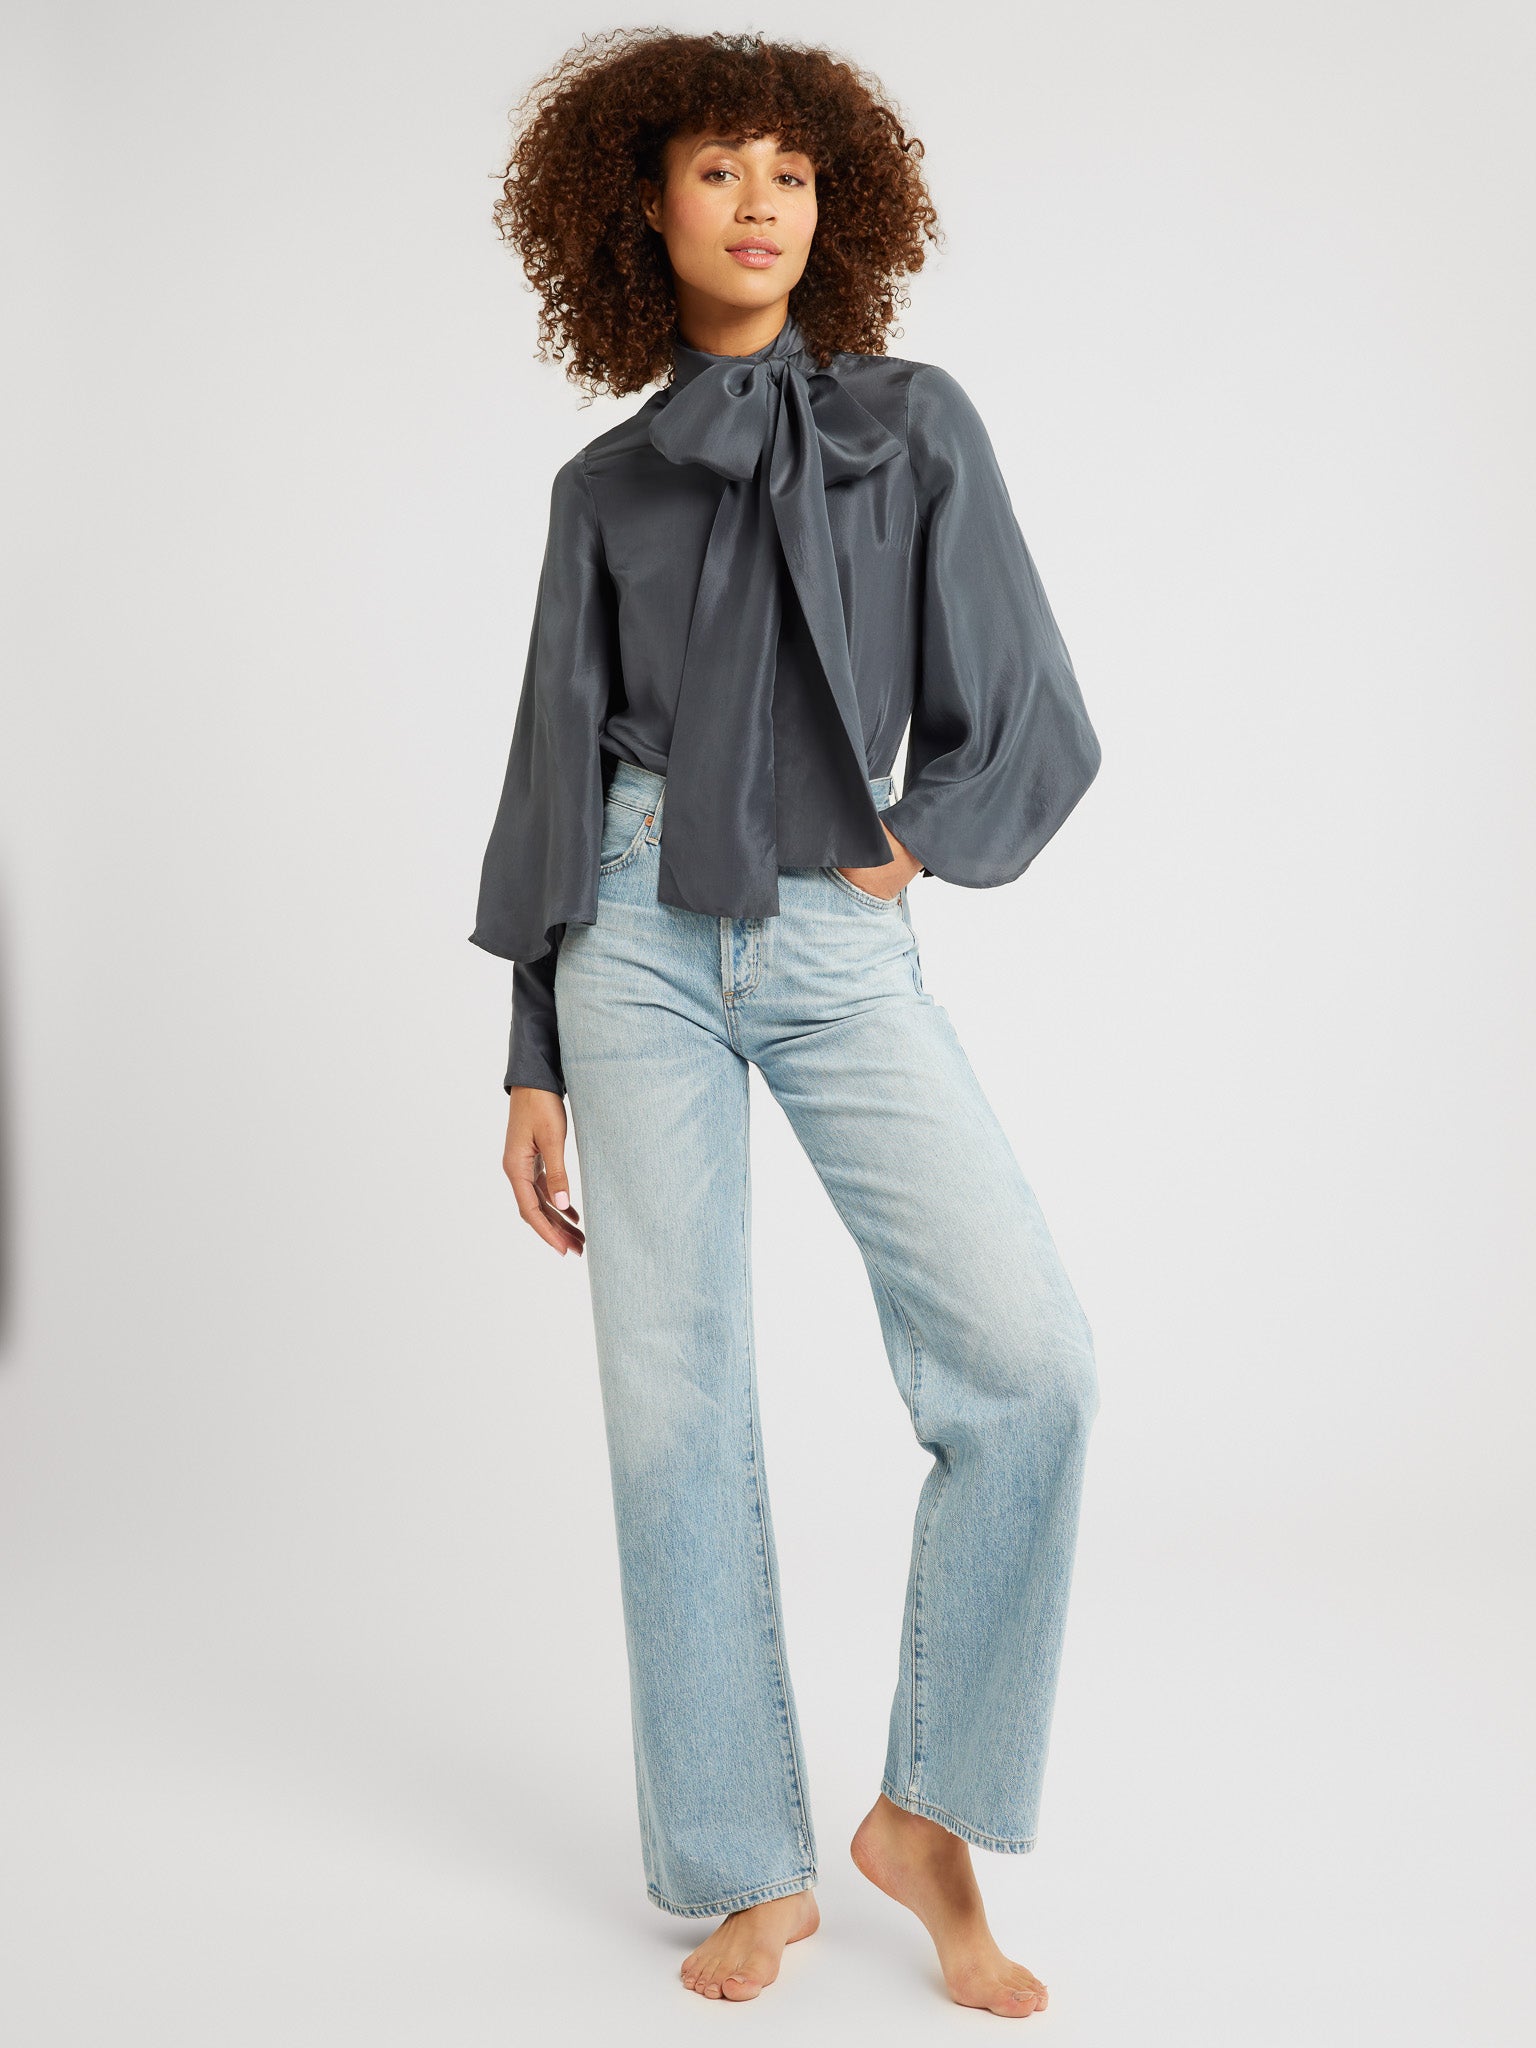 MILLE Clothing Gigi Top in Navy Washed Silk